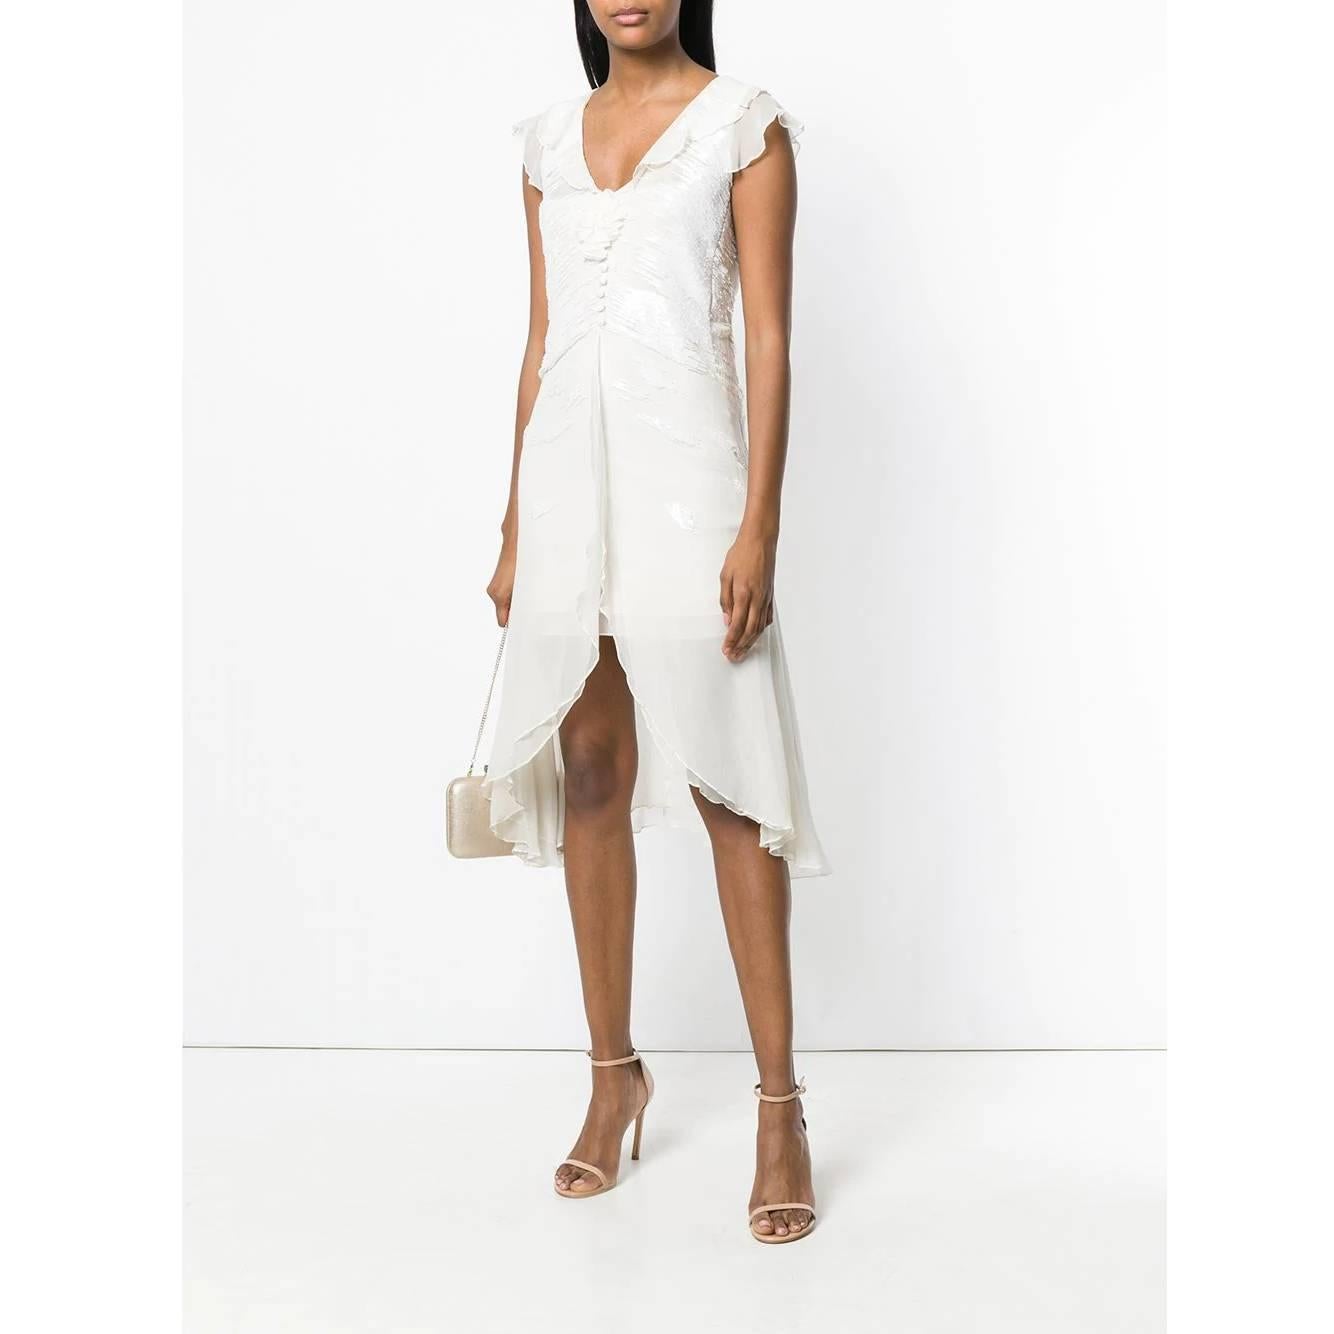 A.N.G.E.L.O. Vintage - Italy
Emporio Armani white semitransparent organza wedding dress. Model with V-neck and asymmetrical cut; white beads, ruffles on the shoulders, front covered buttons and applied flower. Back zip closure. Not provided with